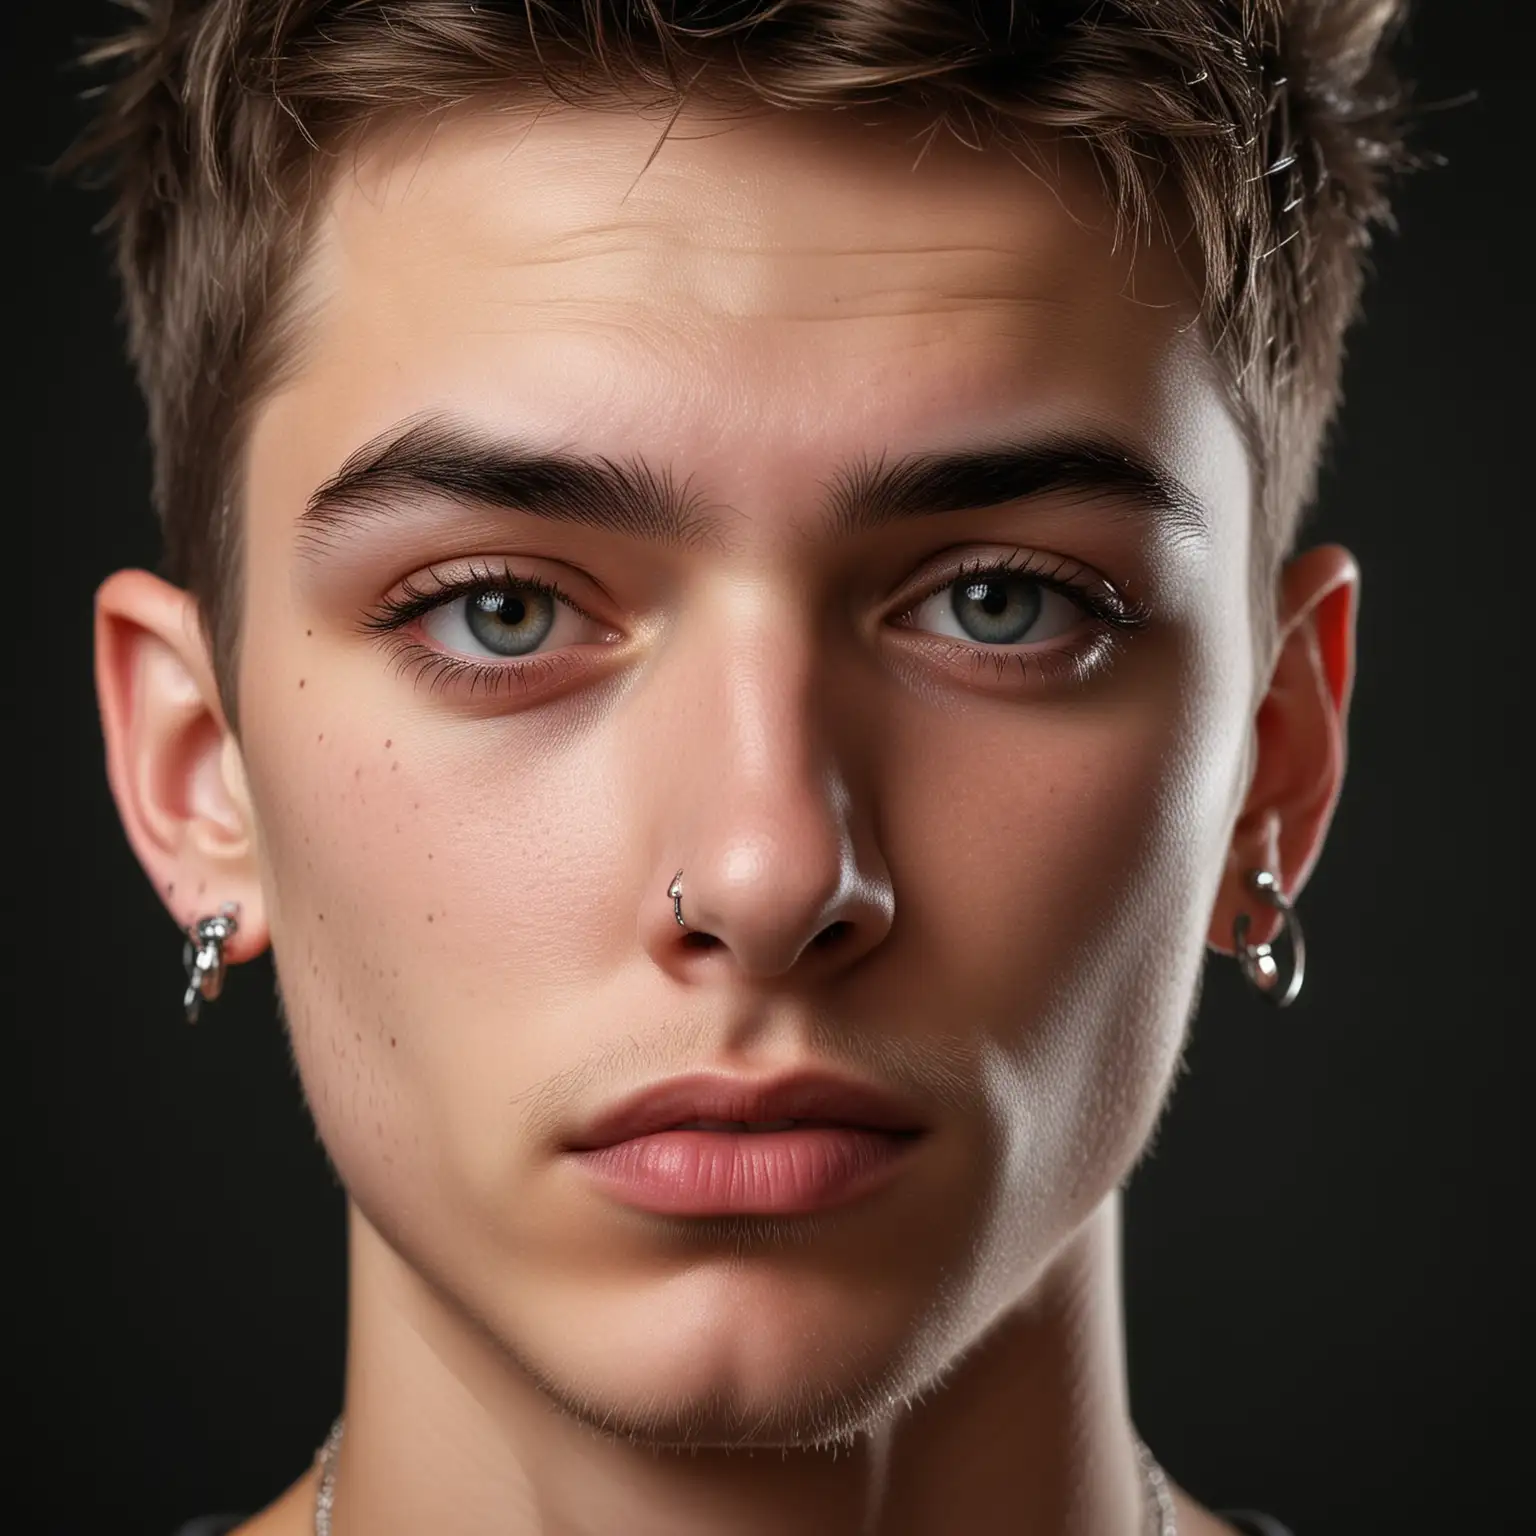 Handsome Boy with Piercings CloseUp Stylized Digital Illustration